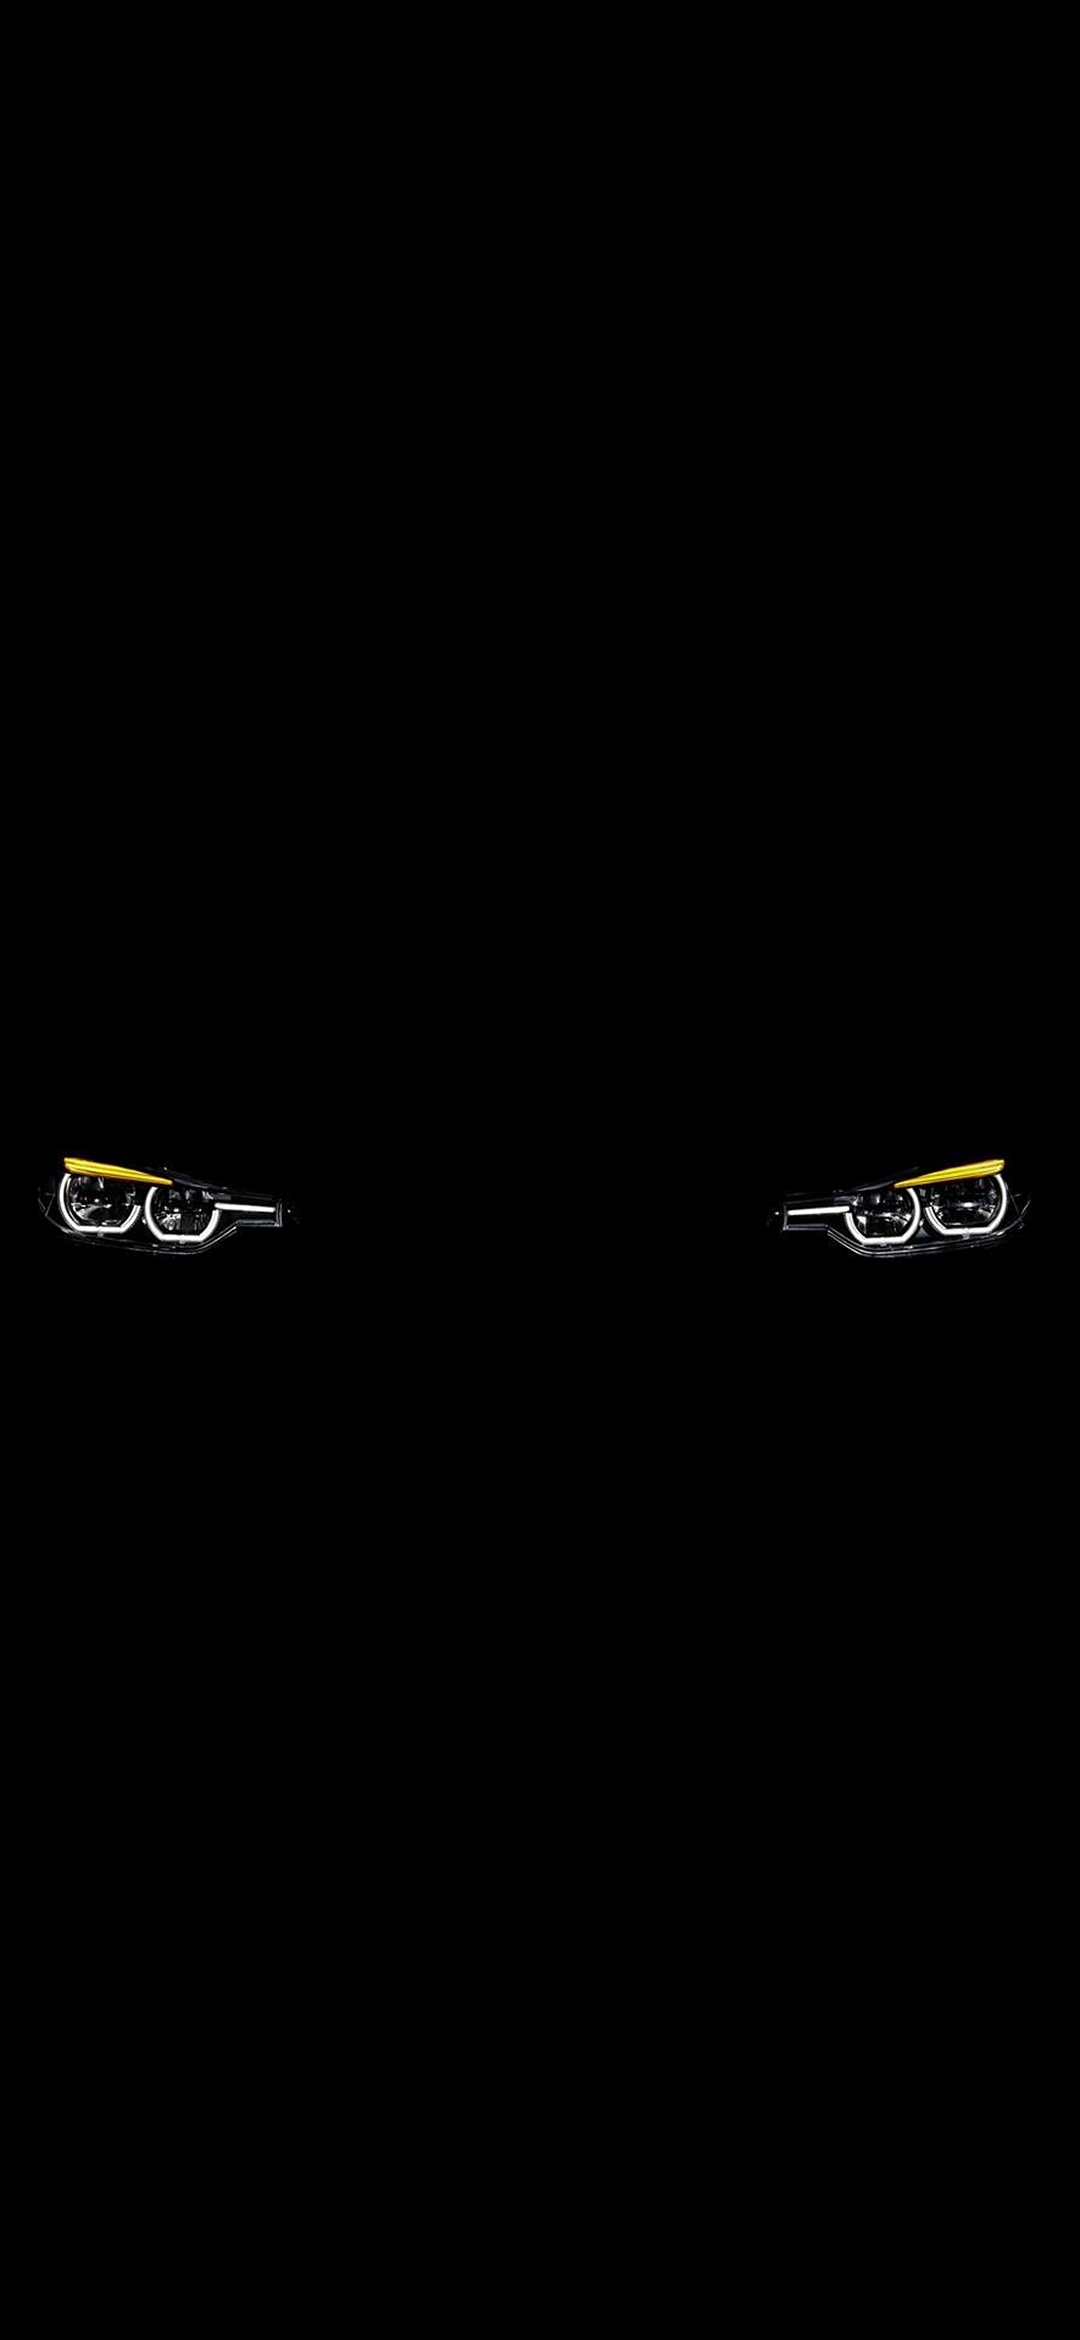 BMW Amoled Wallpapers - Wallpaper Cave